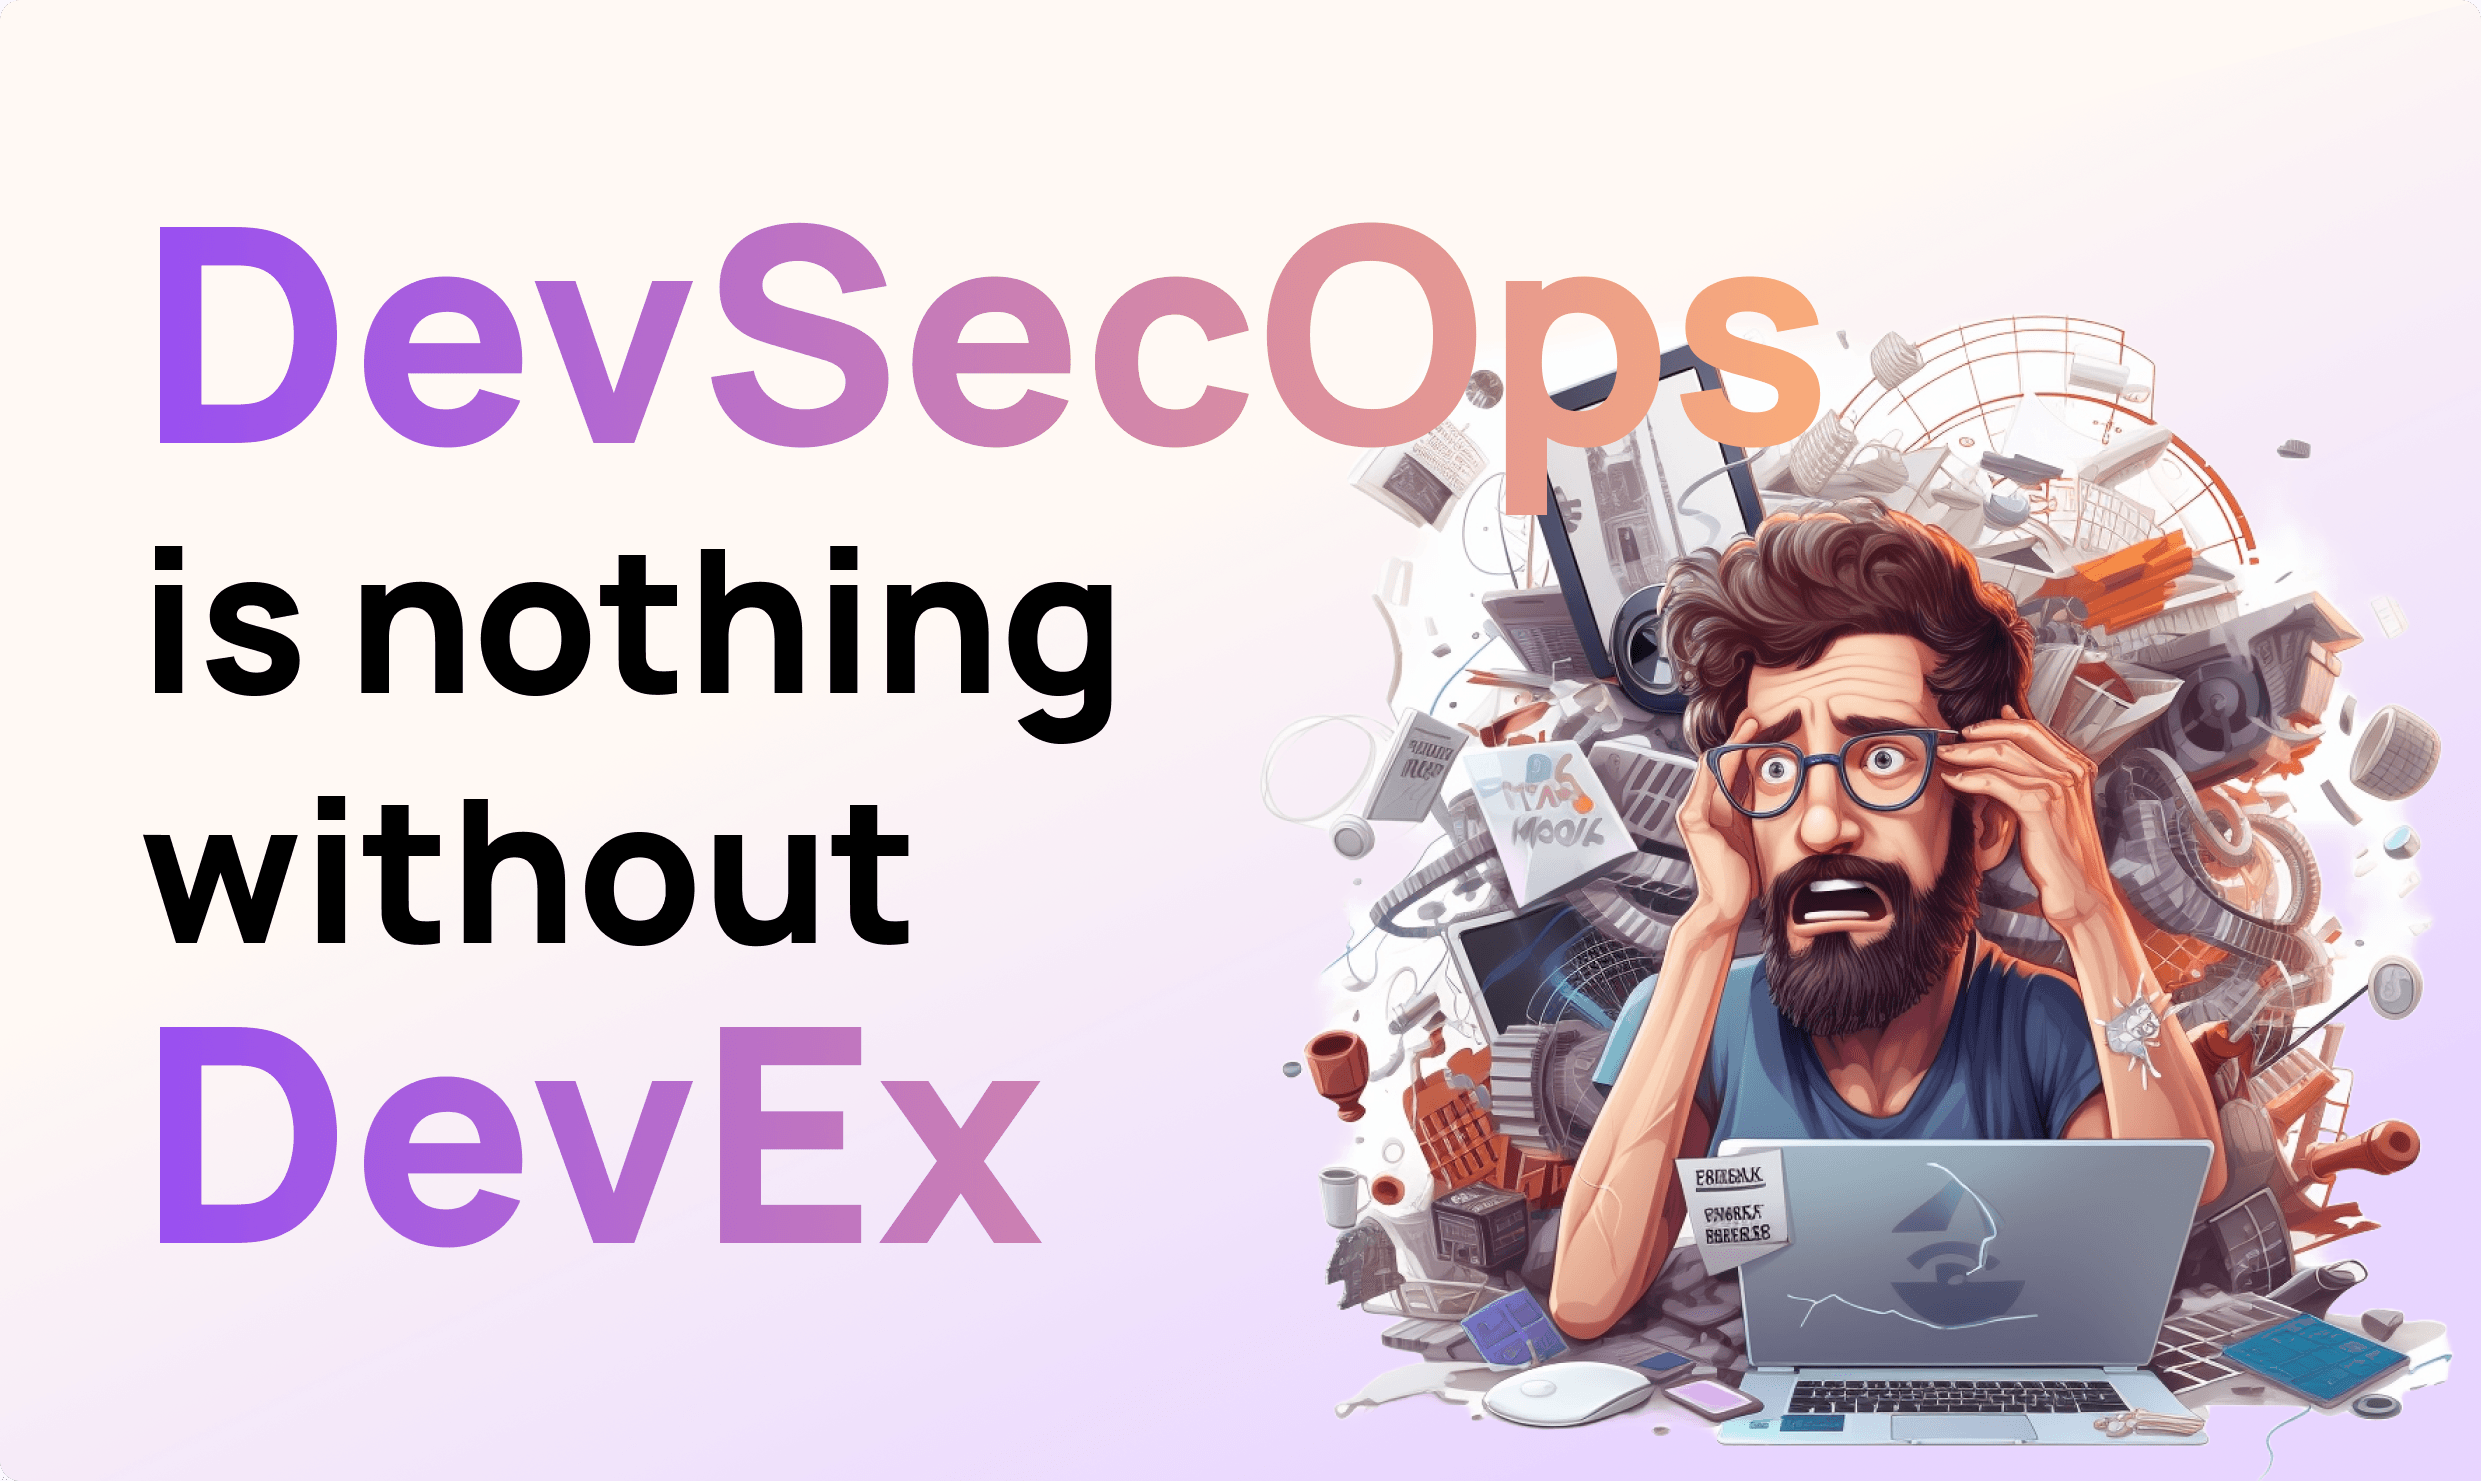 DevSecOps is nothing without DevEx